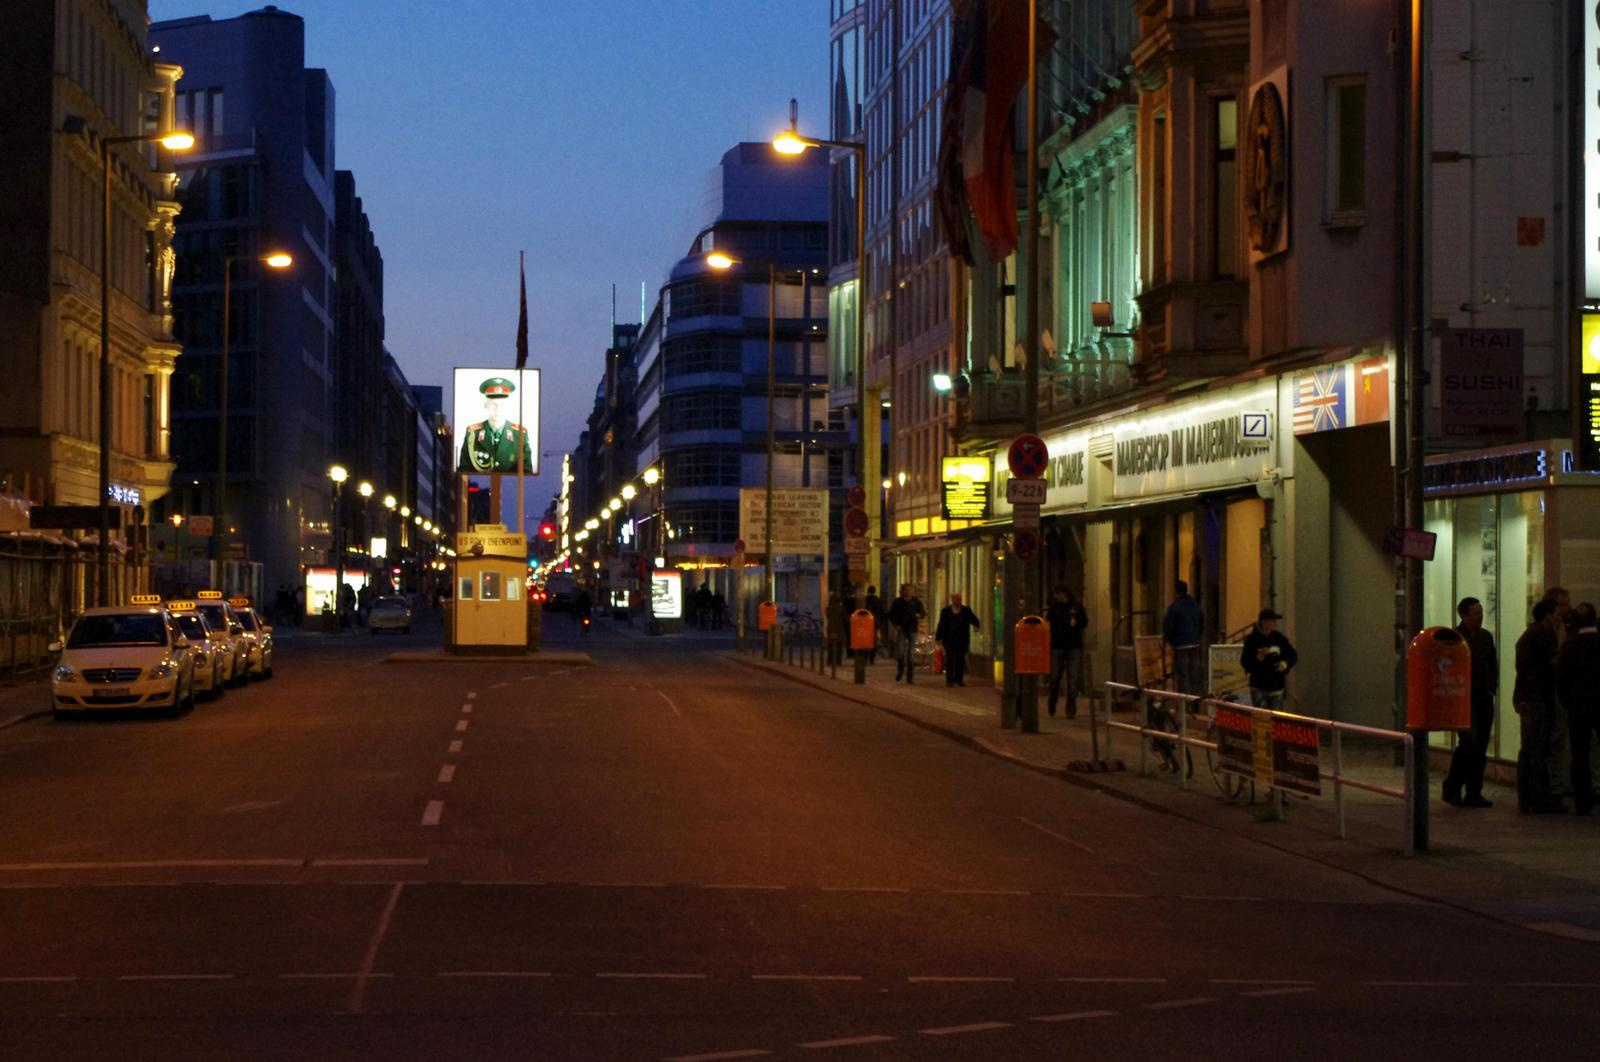 Checkpoint Charlie by night